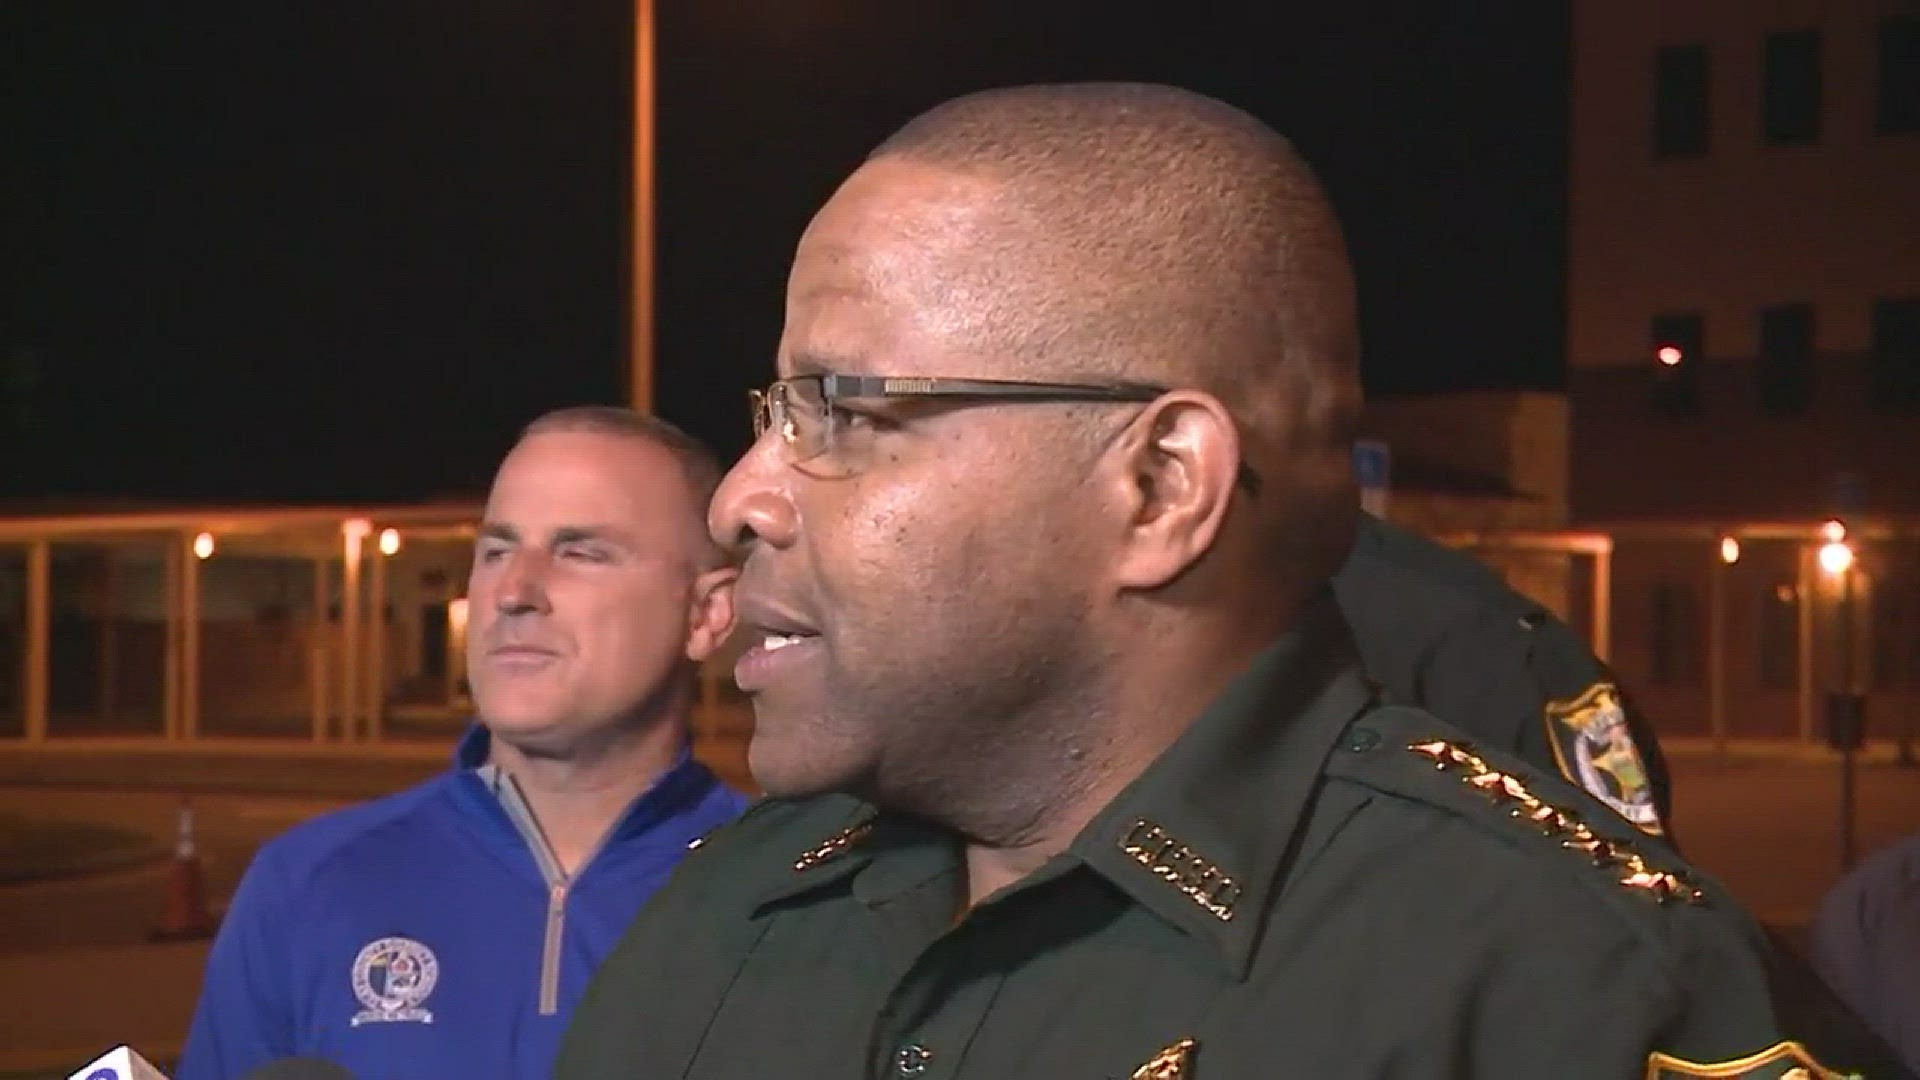 Sheriff Darryl Daniels addressed the county to talk about the school threats being made on social media, telling kids to stop; they could face 15 years in prison.